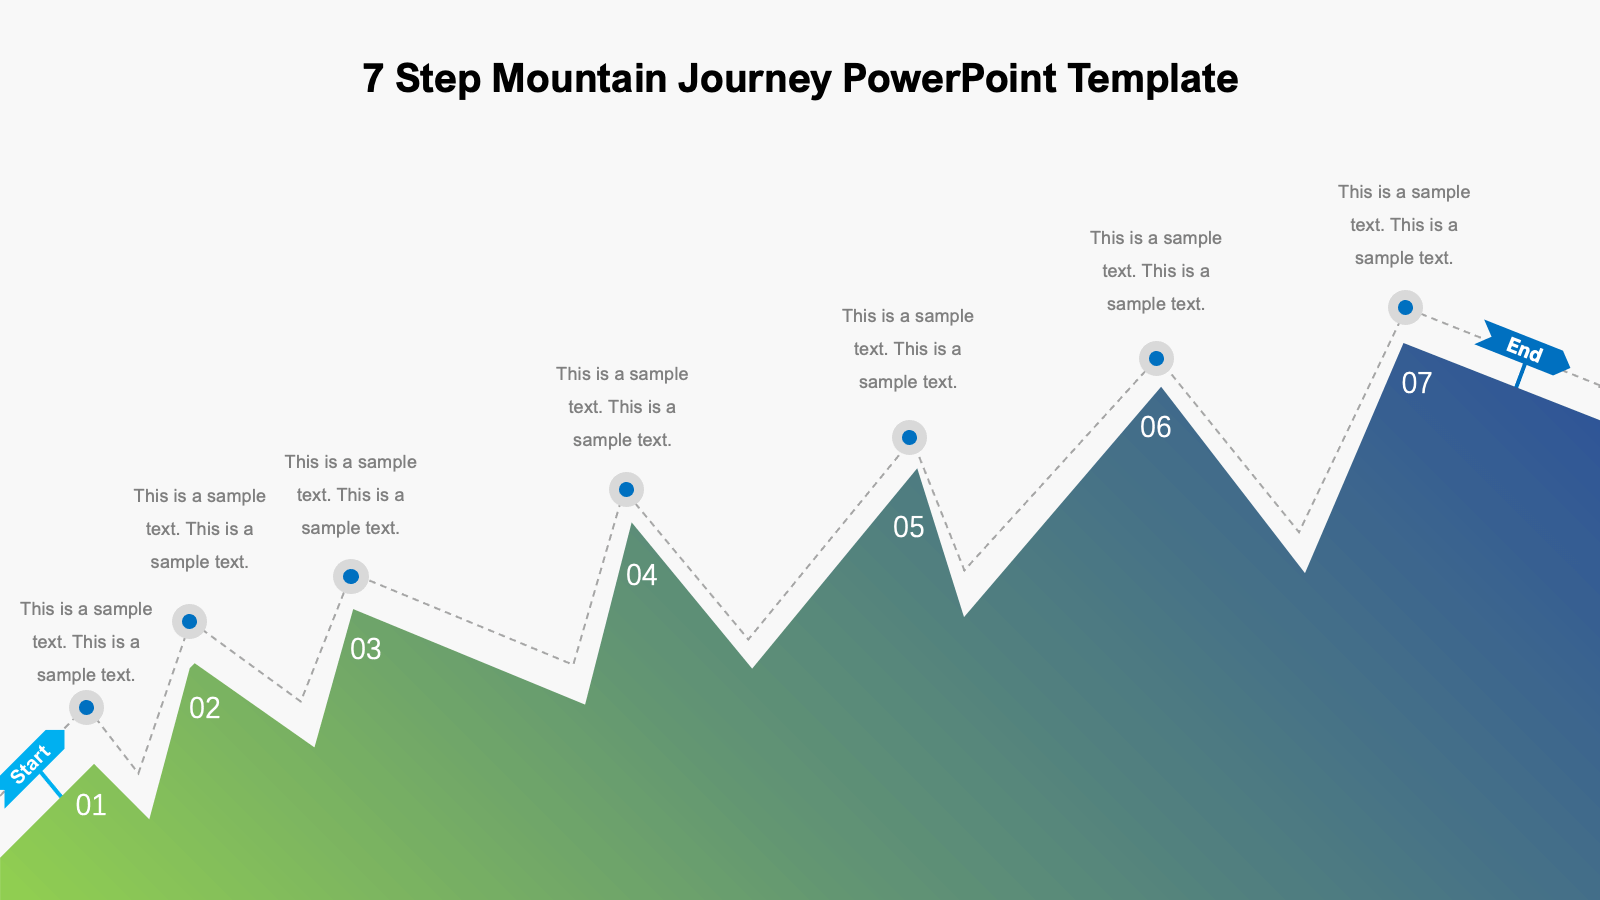 7 Step Mountain Journey PowerPoint Template Free Download